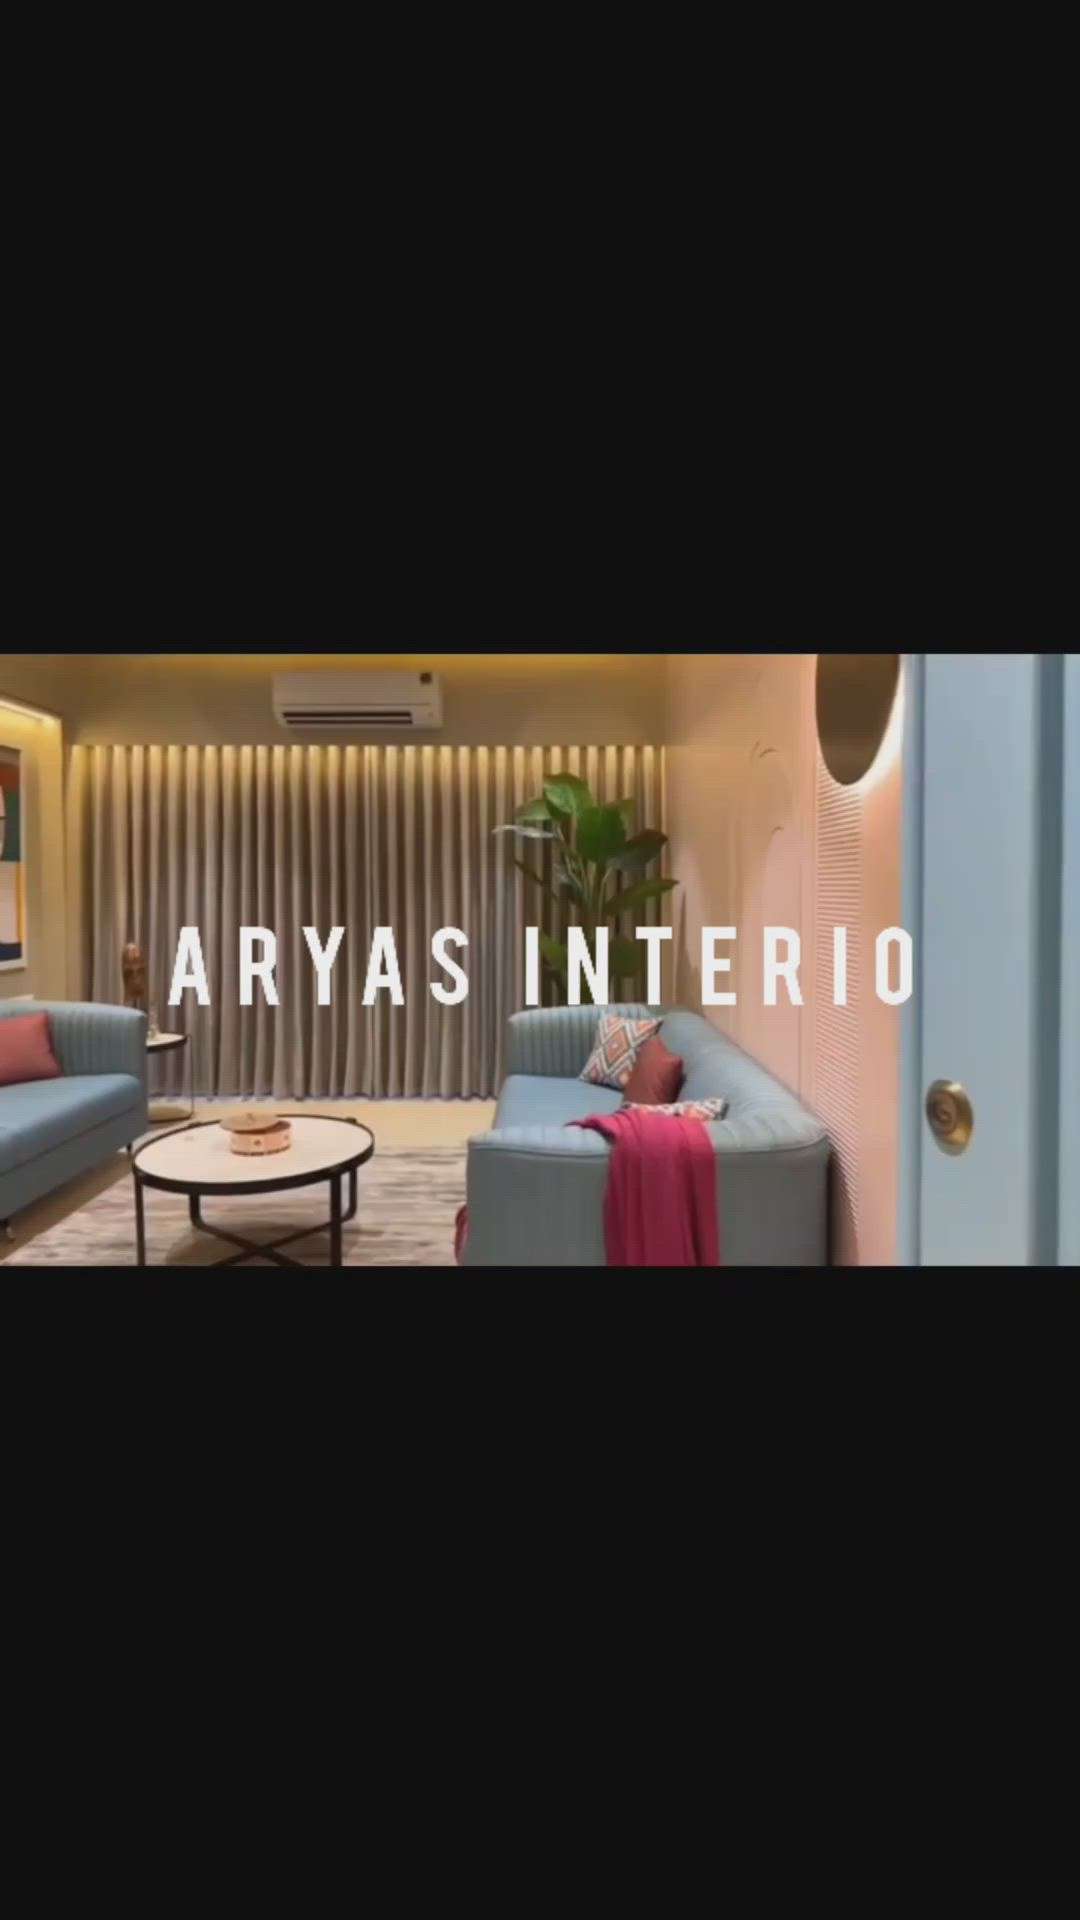 Design Interios by Aryas interio & Infra Group,
Provide complete end to end Professional Construction & interior Services in Delhi Ncr, Gurugram, Ghaziabad, Noida, Greater Noida, Faridabad, chandigarh, Manali and Shimla. Contact us right now for any interior or renovation work, call us @ +91-7018188569 &
Visit our website at www.designinterios.com
Follow us on Instagram #aryasinterio and Facebook @aryasinterio .
#uttarpradesh #construction_himachal
#noidainterior #noida #delhincr  #noidaconstruction #interiordesign #interior #interiors #interiordesigner #interiordecor #interiorstyling #delhiinteriors #greaternoida #faridabad #ghaziabadinterior #ghaziabad  #chandigarh